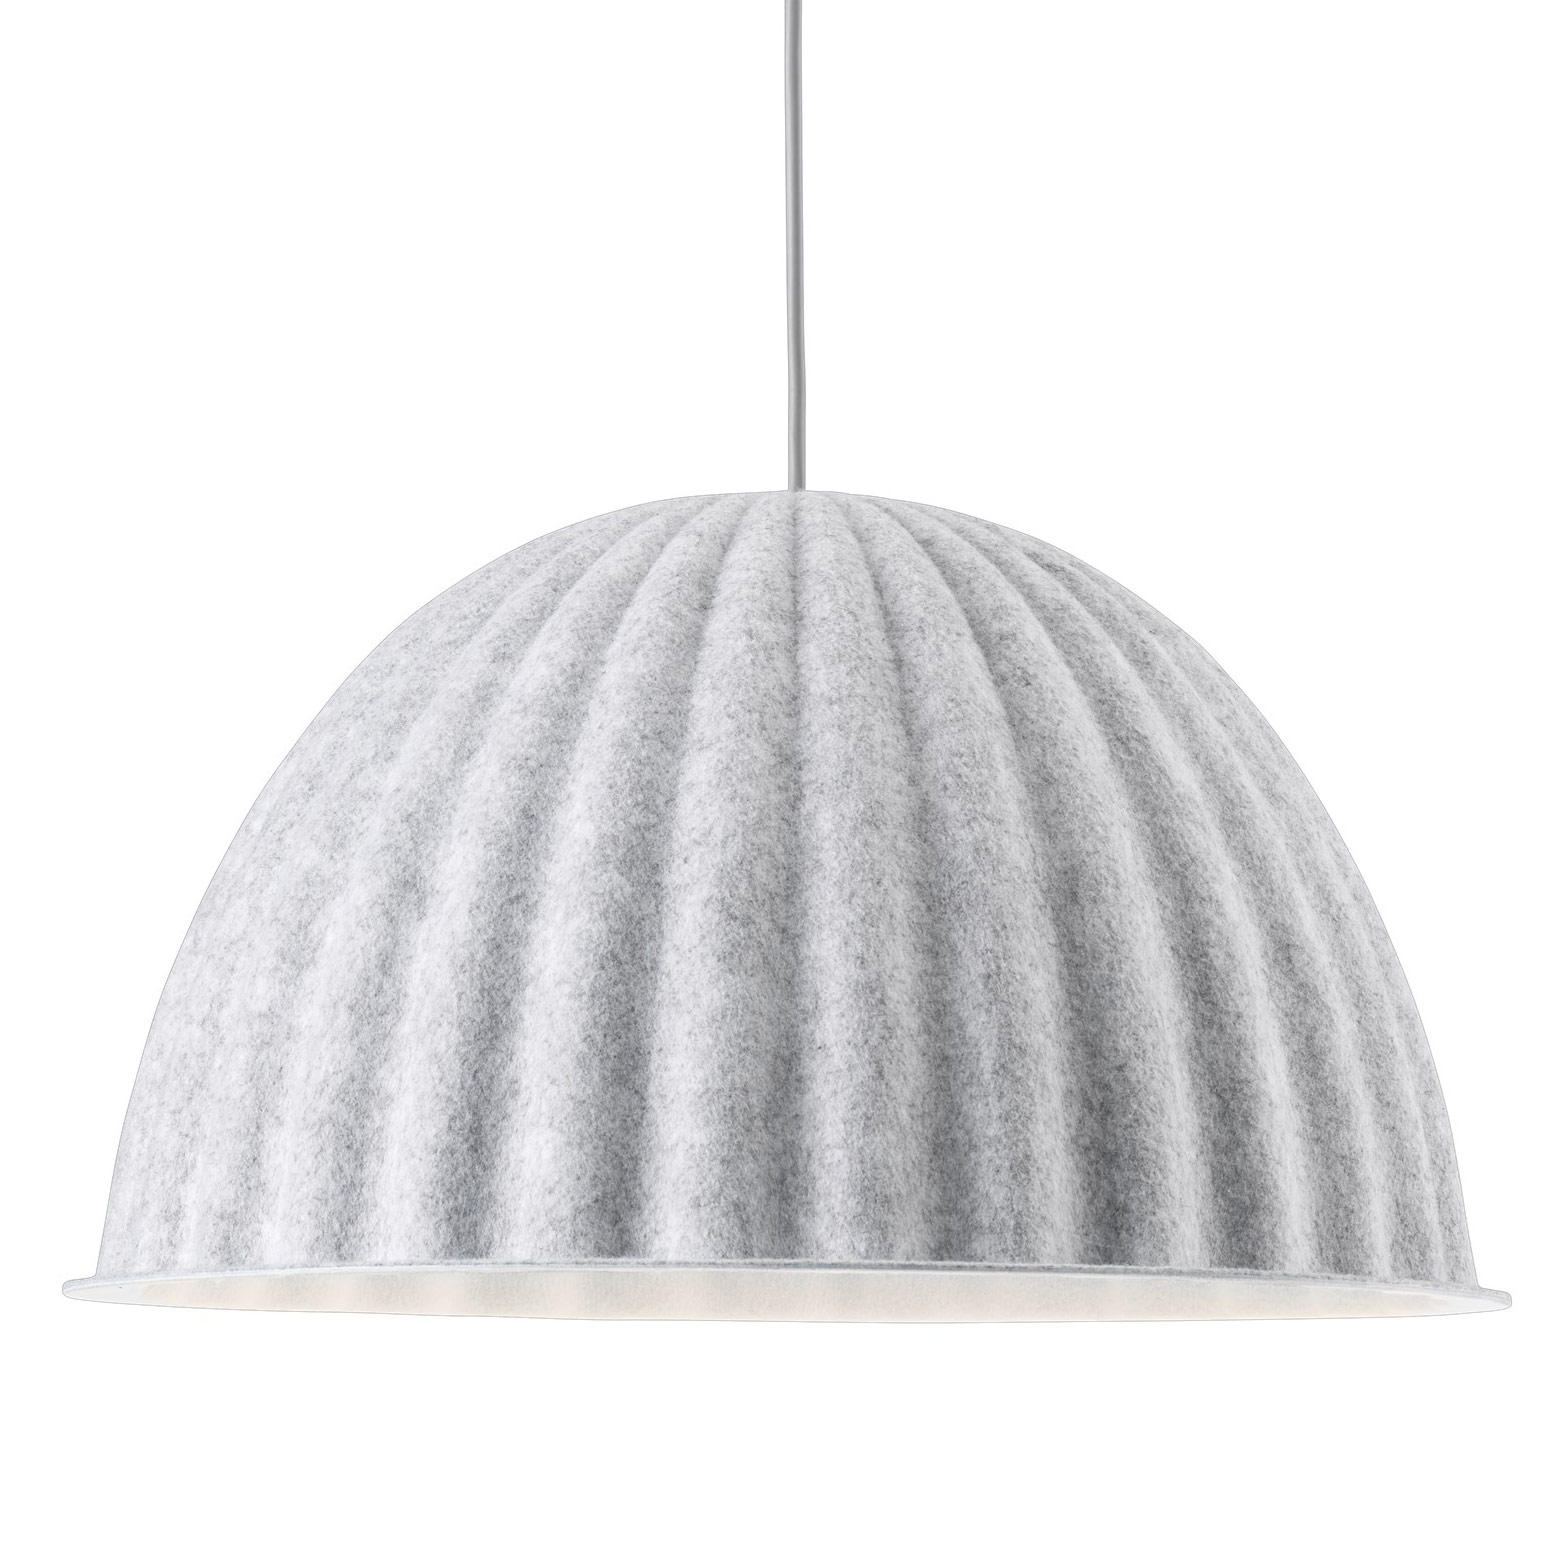 Under the Bell Pendant by Muuto | MUTBPDLPSM-WHME | MUU814073